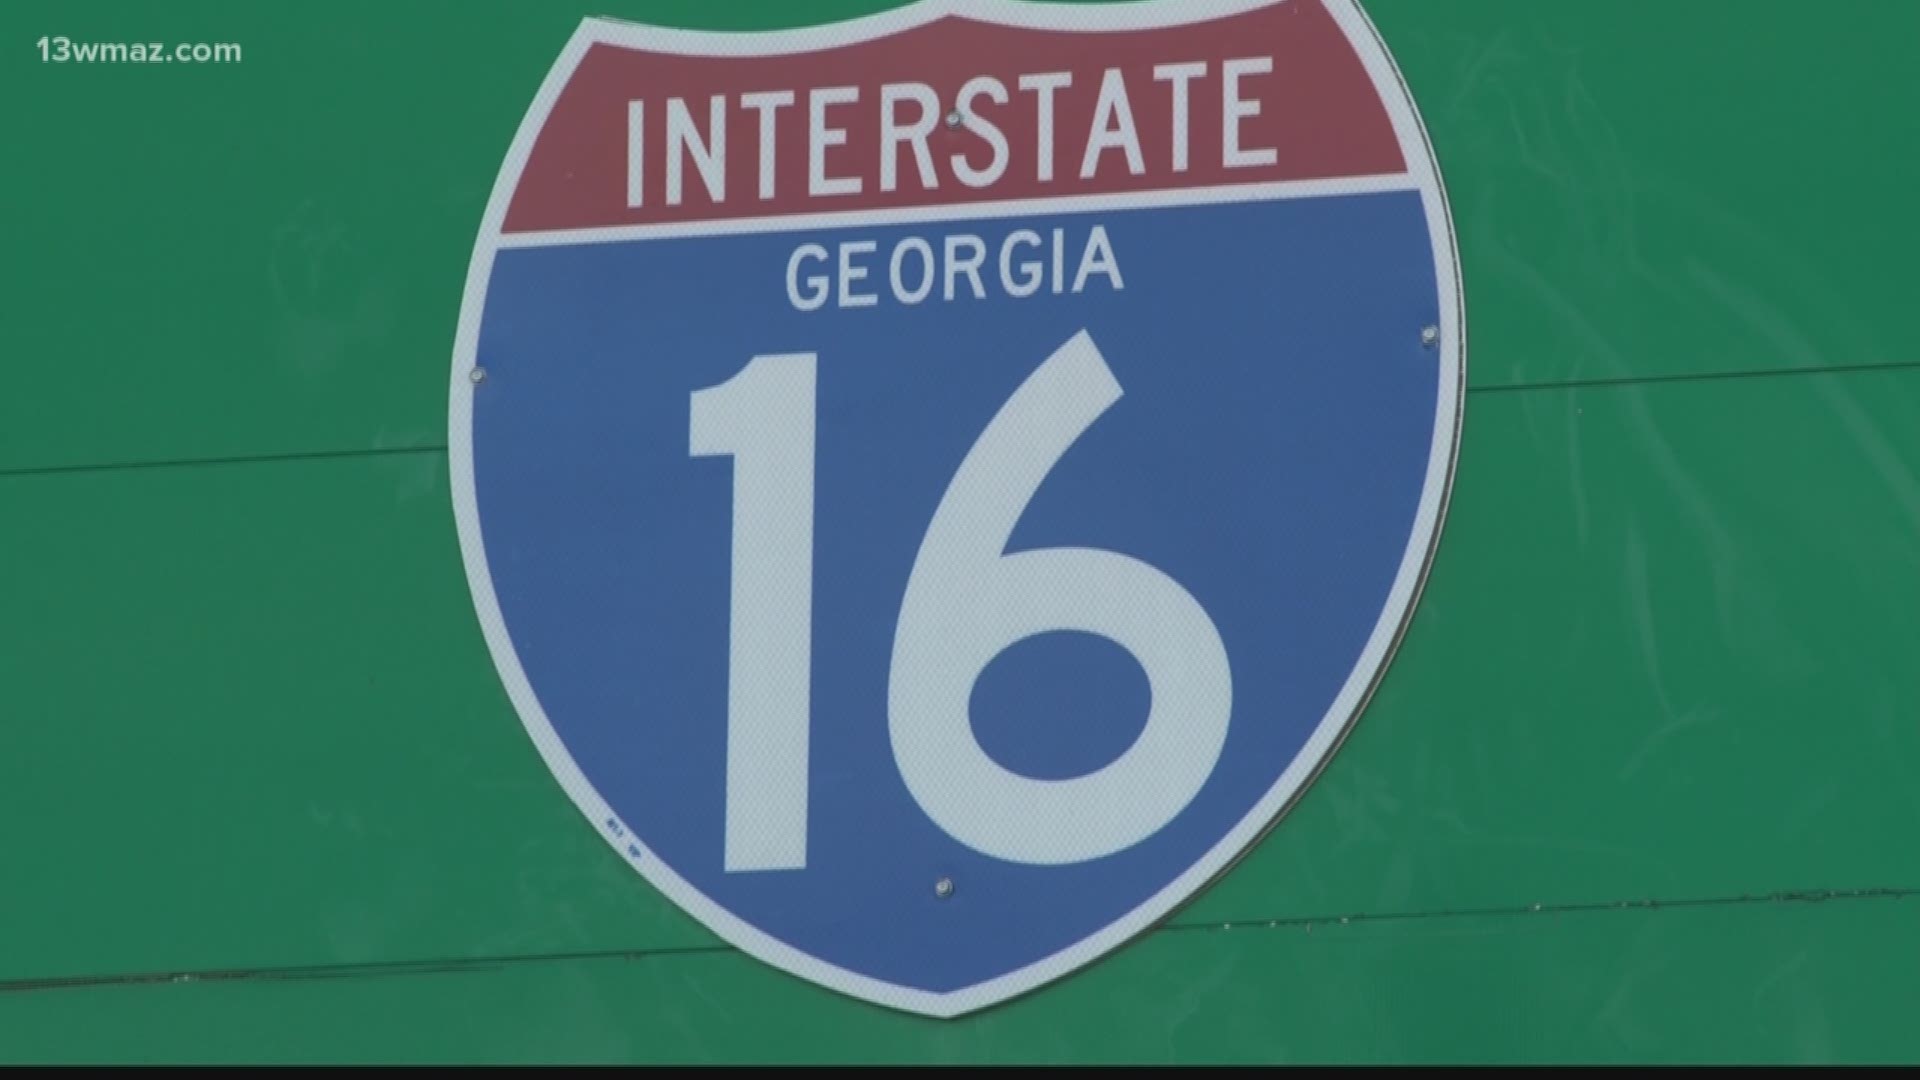 VERIFY: Can the Bobby Jones Interchange name be changed?